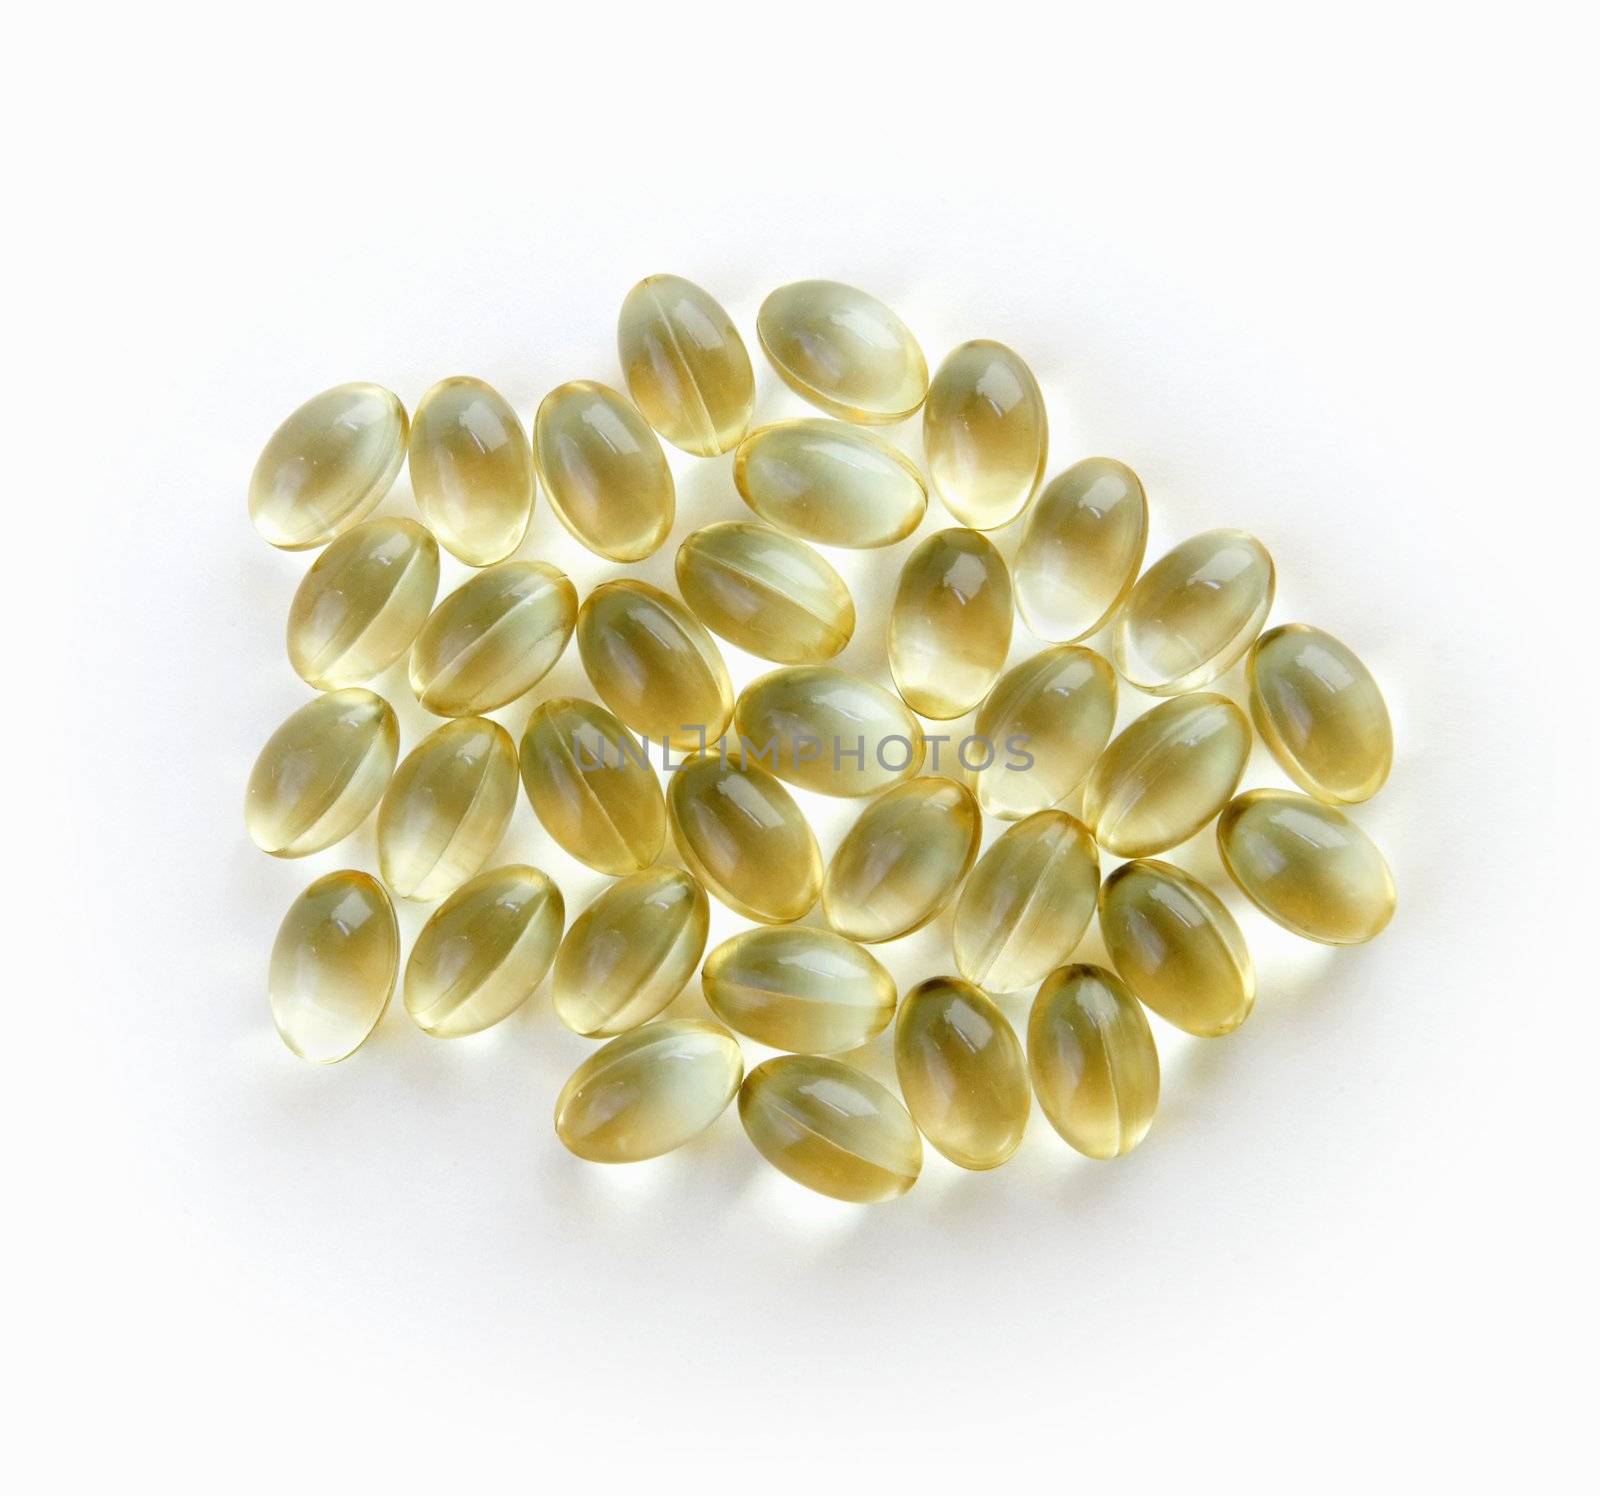 Vitamin E Gel Caps Isolated Against a Pure White Background